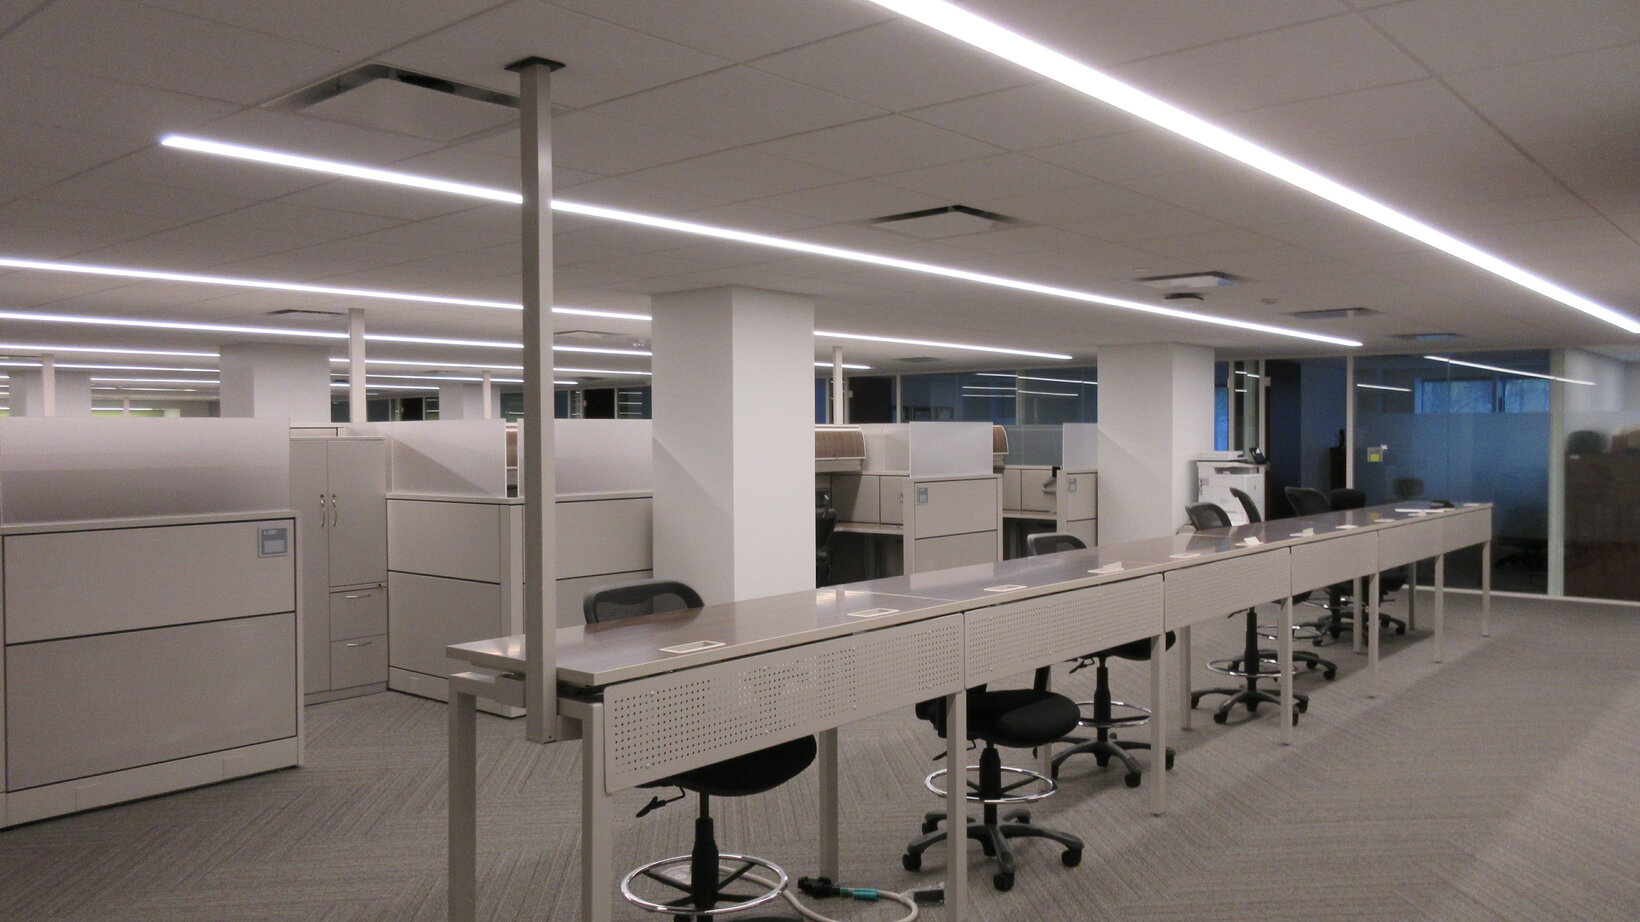 Open work space with desks and chairs, and an overhead fluorescent light